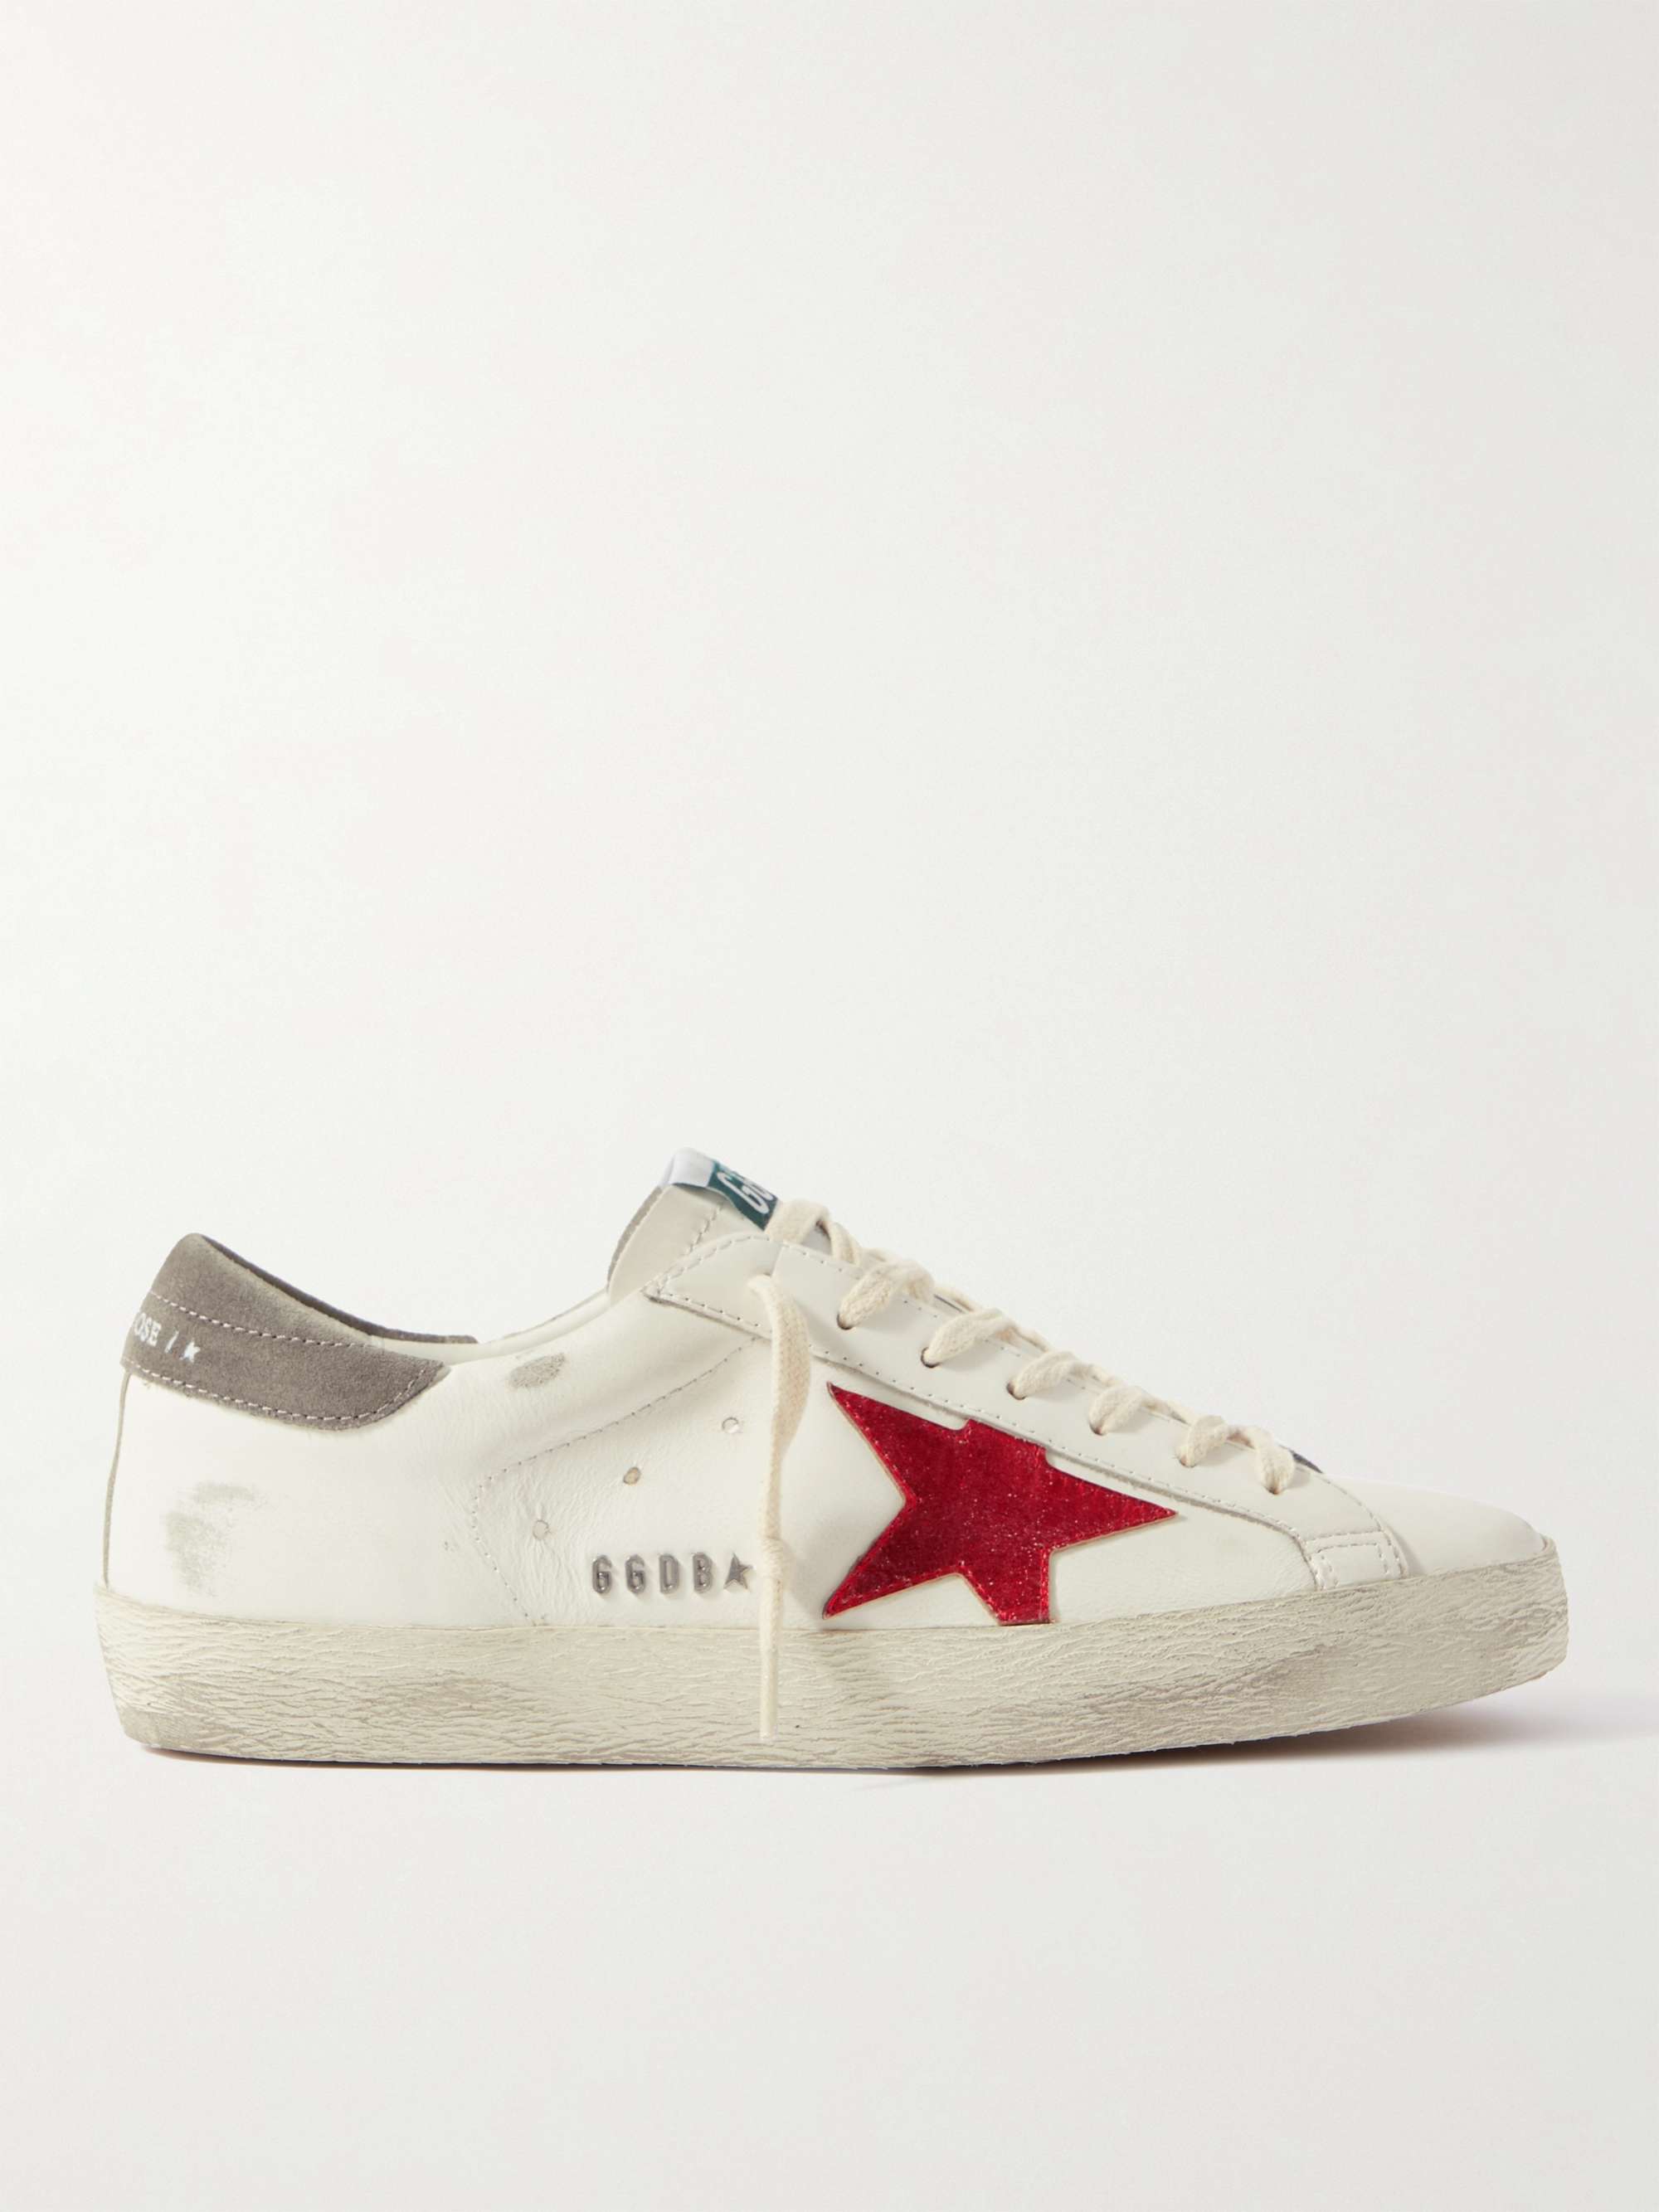 GOLDEN GOOSE Superstar Distressed Leather and Suede Sneakers for Men ...